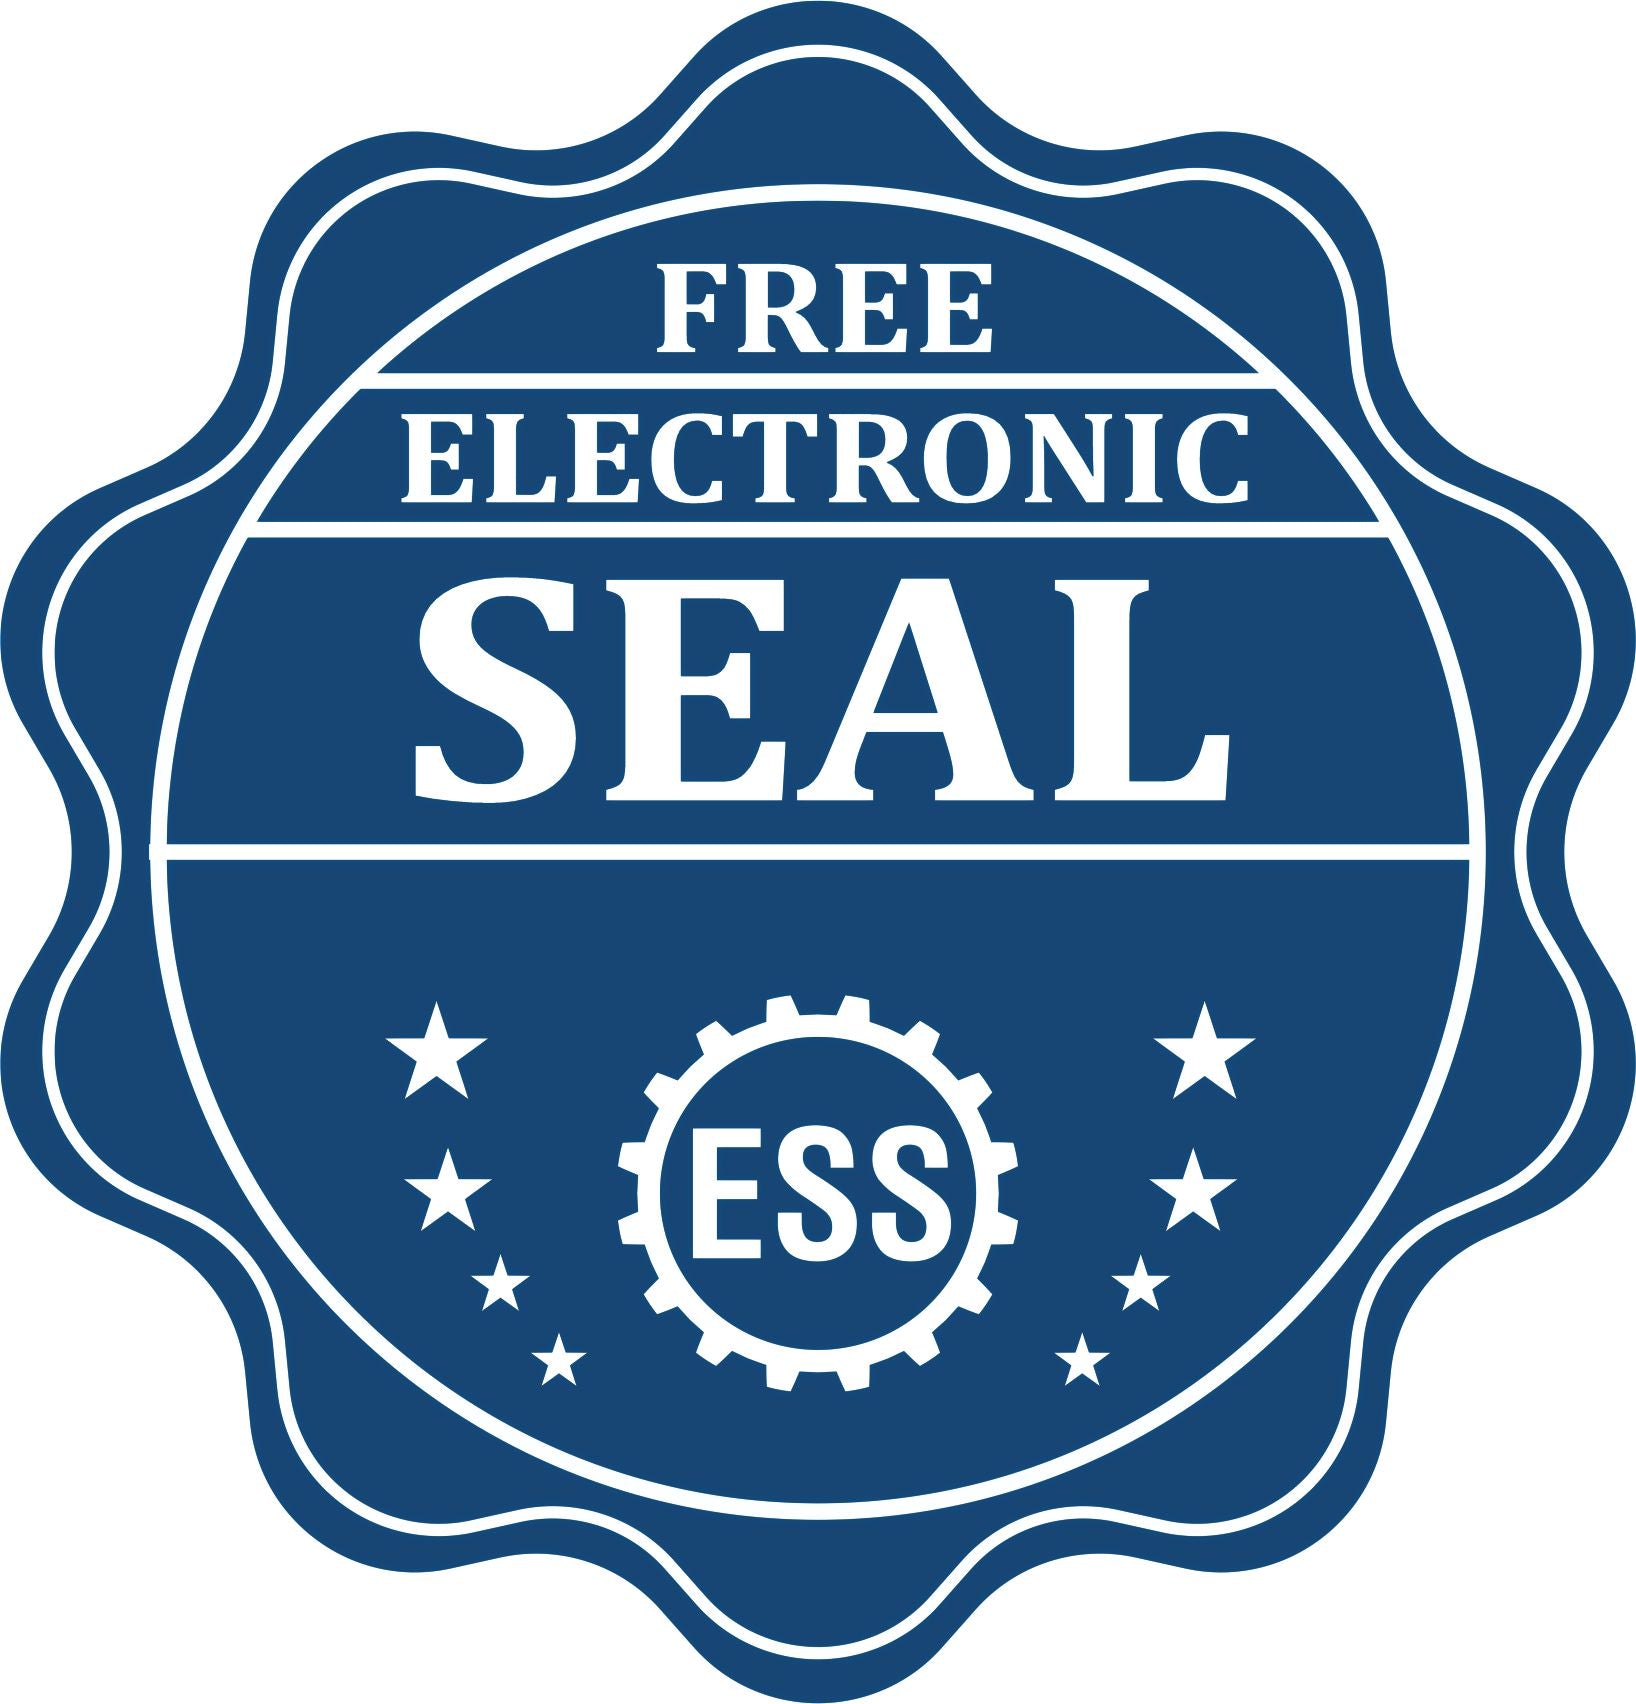 A badge showing a free electronic seal for the Slim Pre-Inked Tennessee Landscape Architect Seal Stamp with stars and the ESS gear on the emblem.